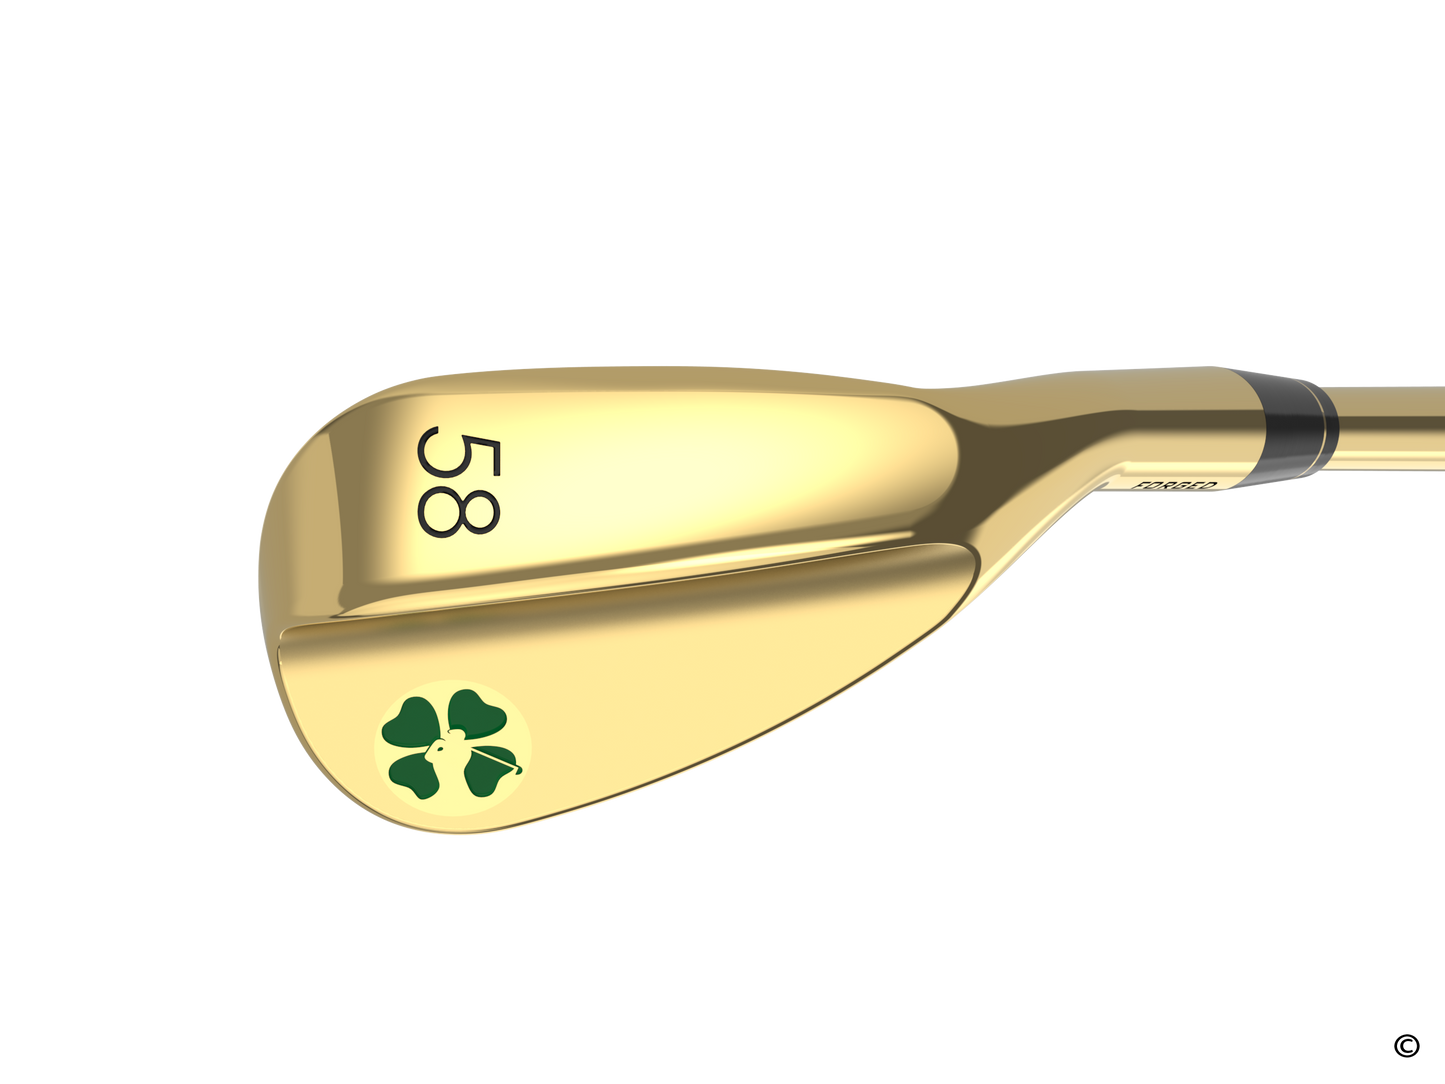 Signature Gold 58 Degree Flop Wedge